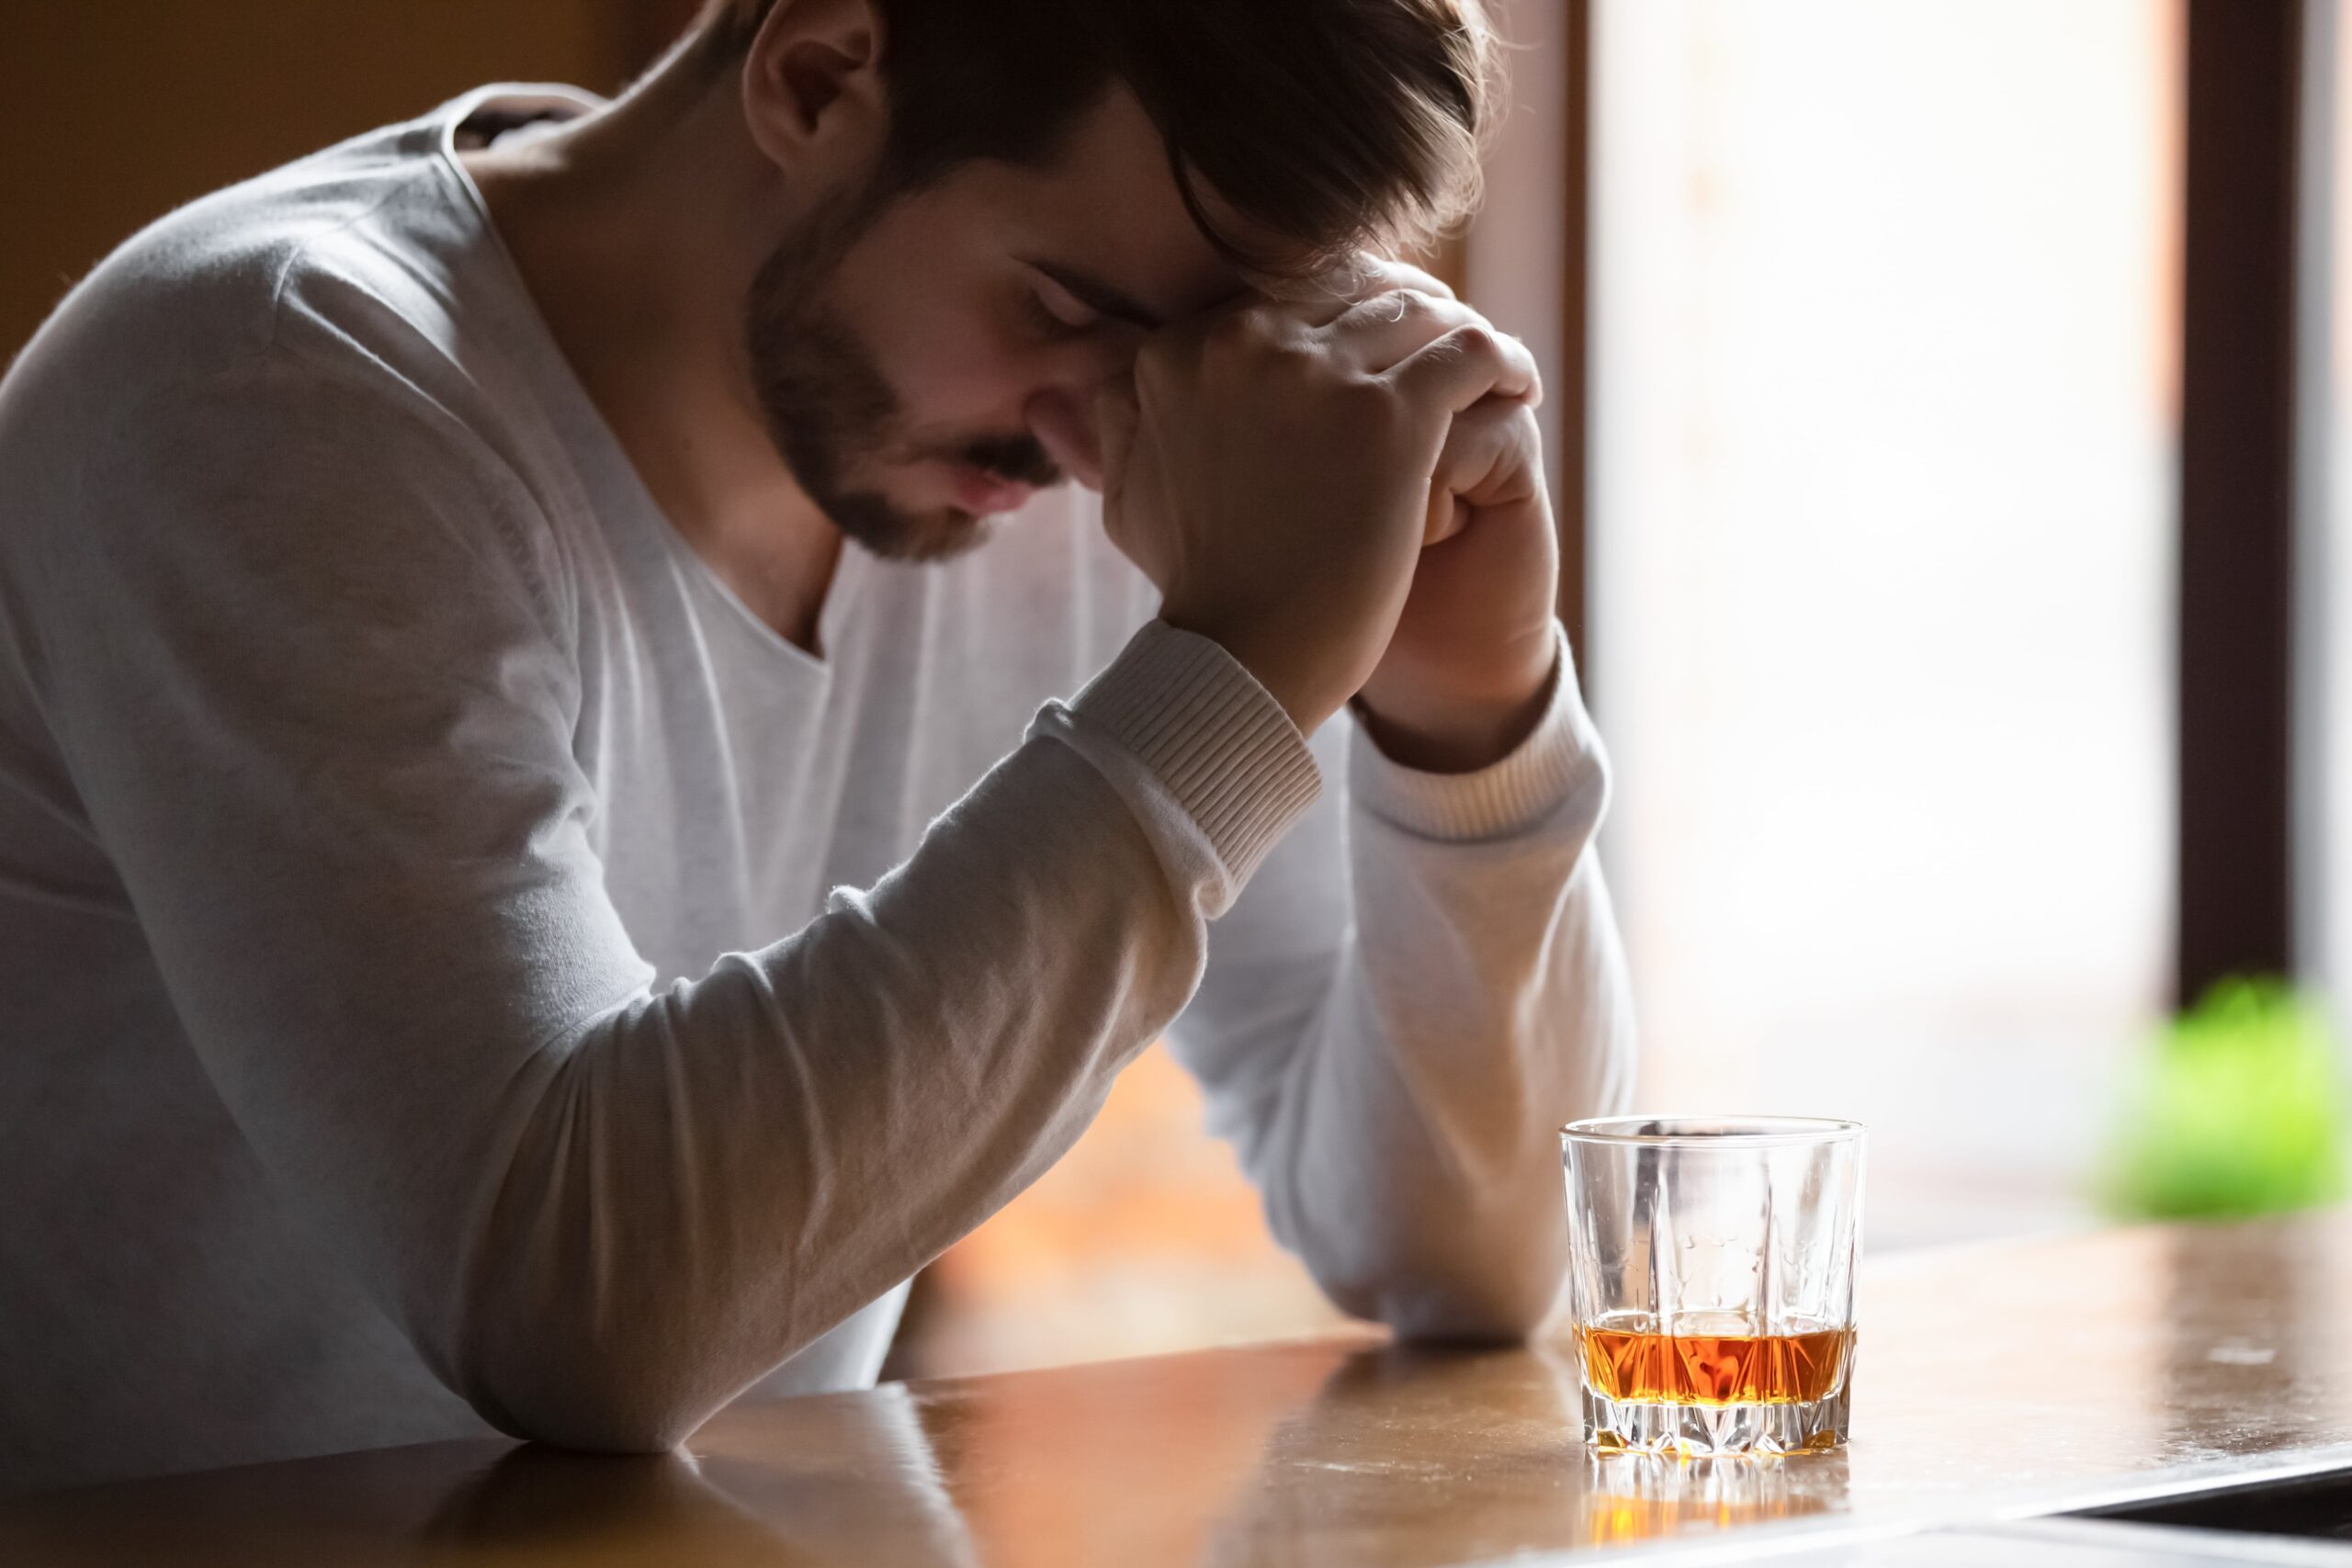 man struggling with withdrawal symptoms during Dry January